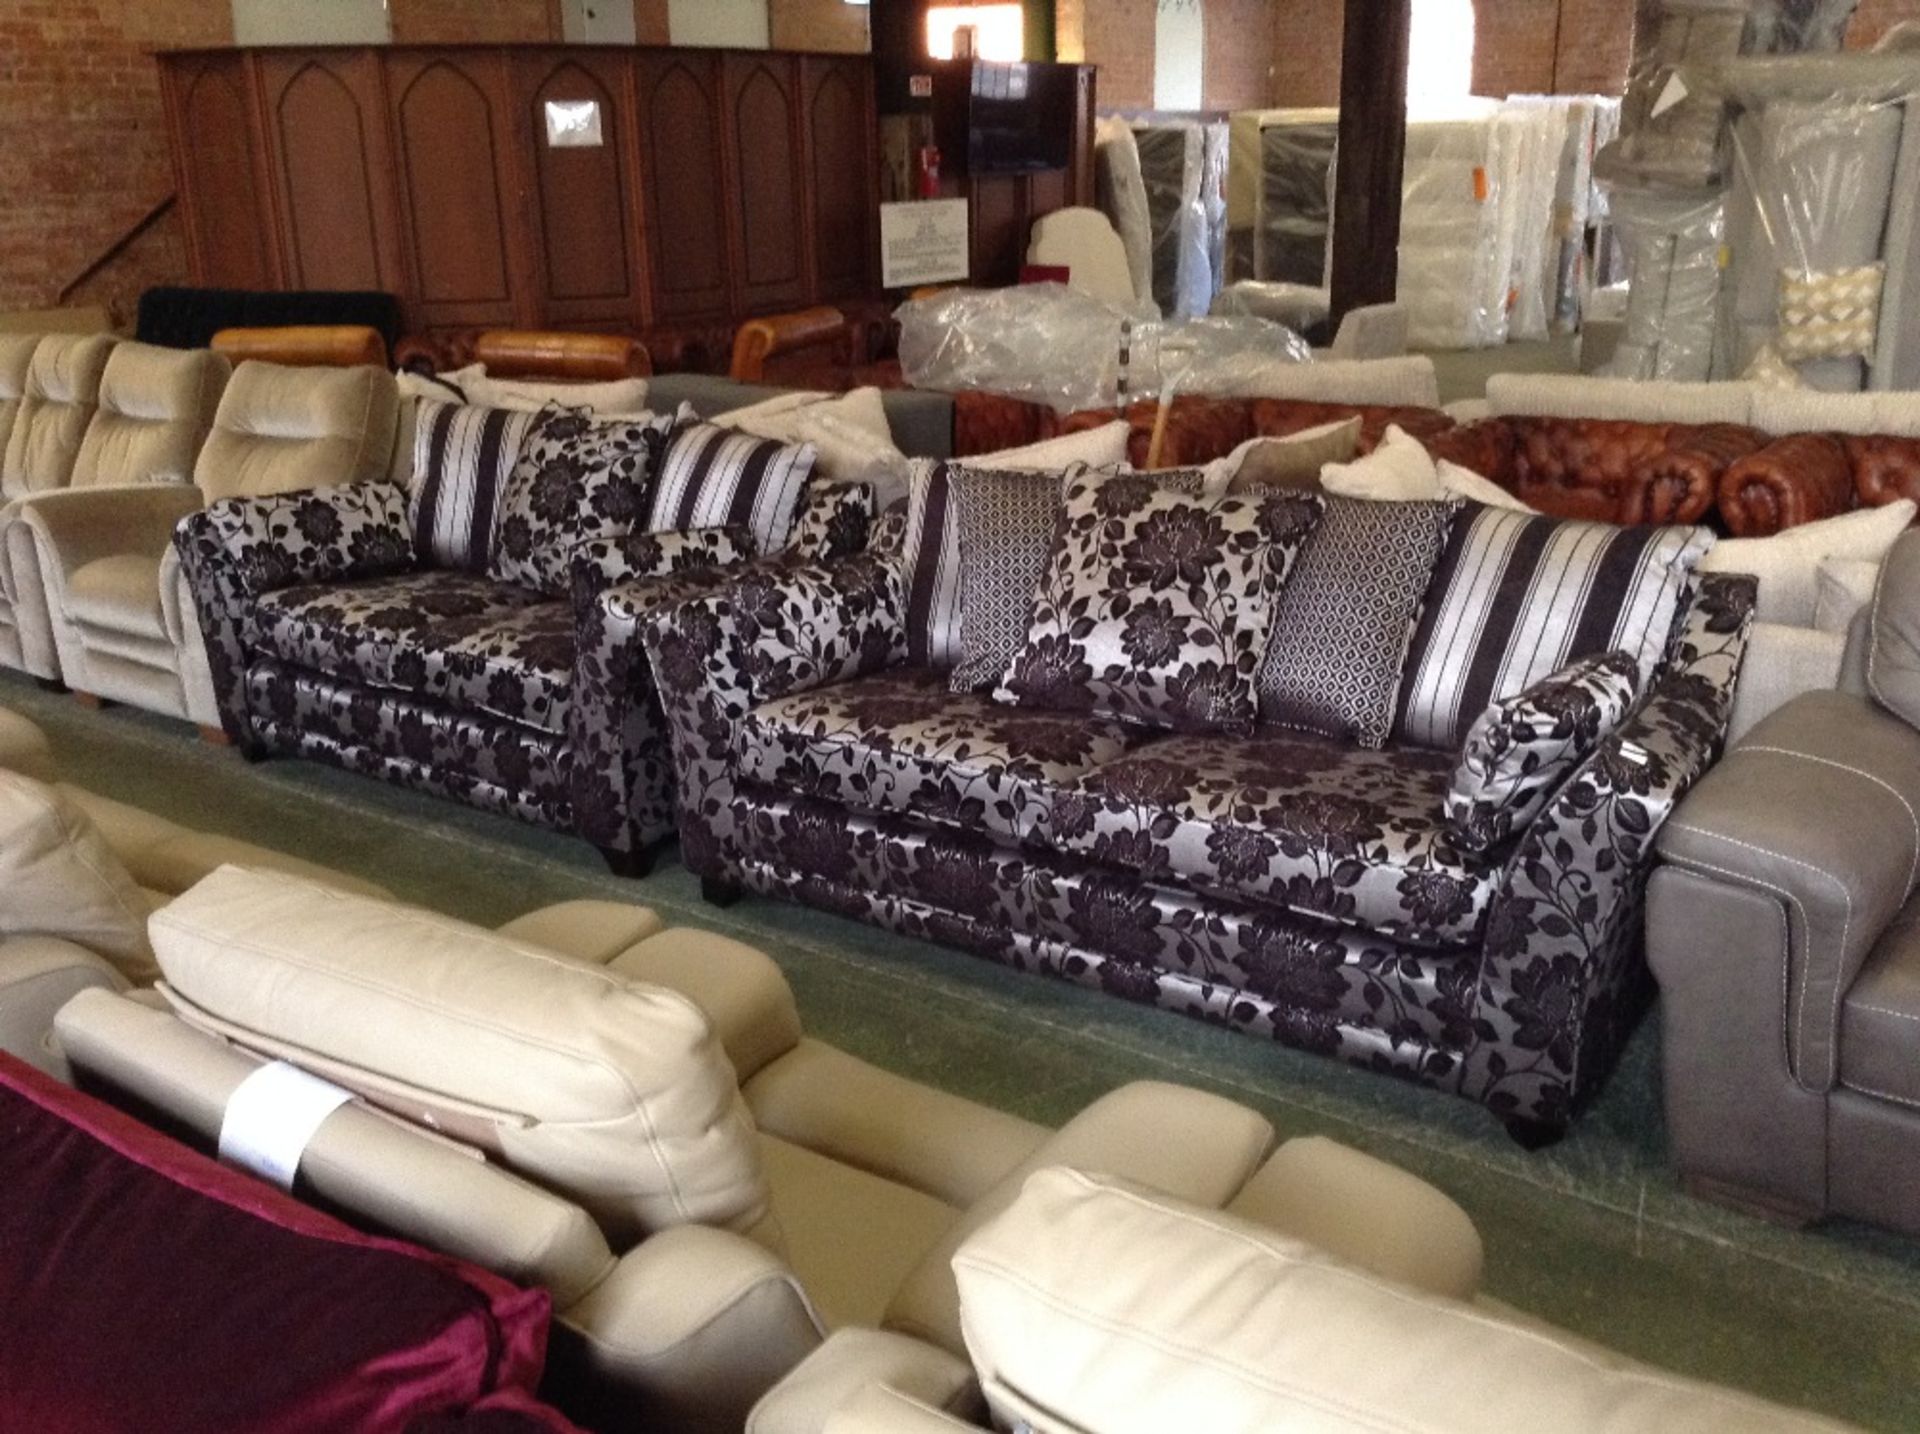 PURPLE AND SILVER FLORAL PATTERNED 3 SEATER SOFA A